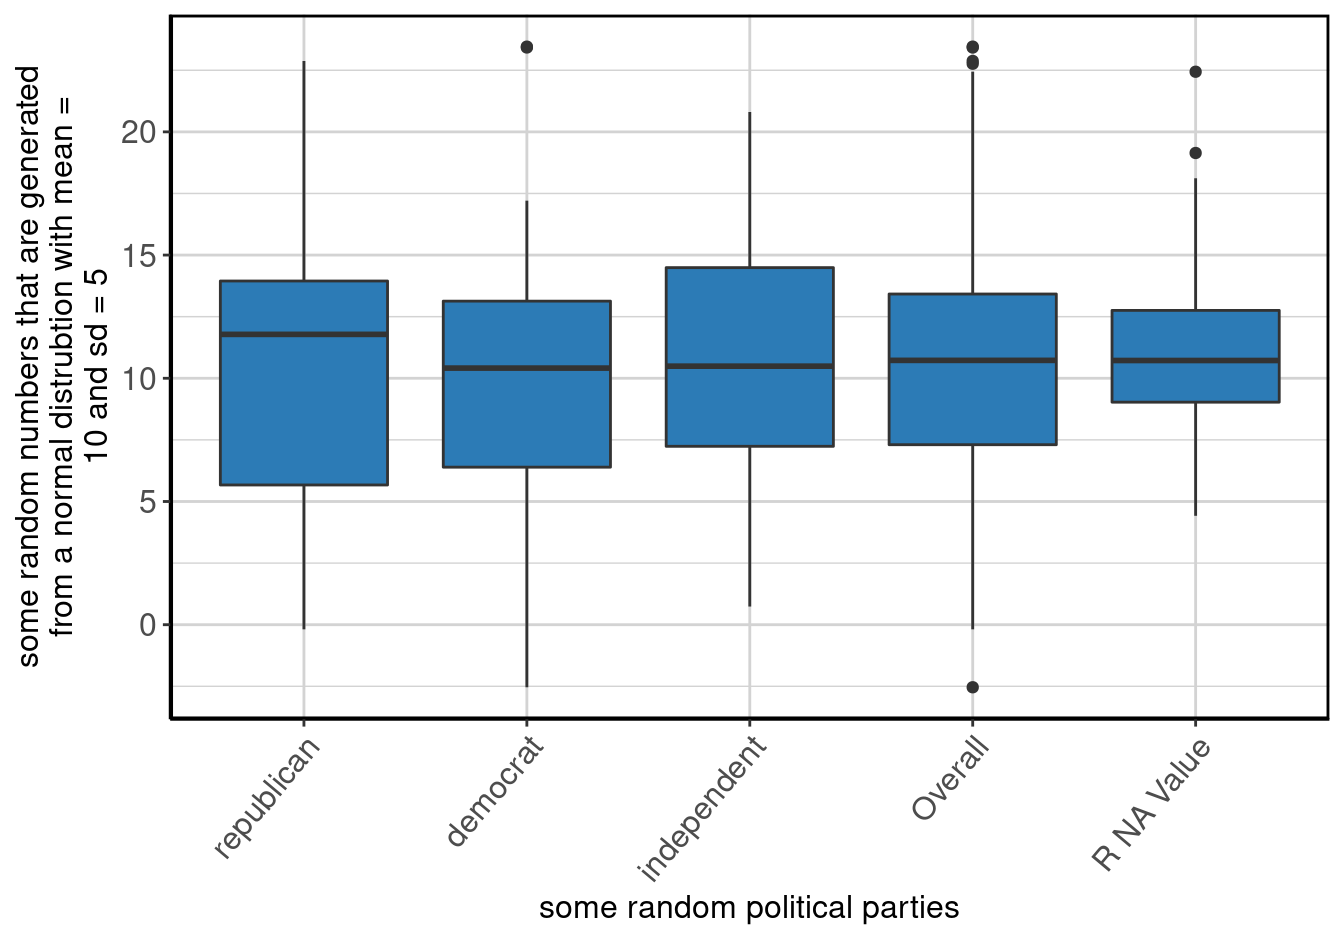 Boxplot of <b>some random numbers that are generated from a normal distrubtion with mean = 10 and sd = 5</b> by <b>some random political parties</b>.